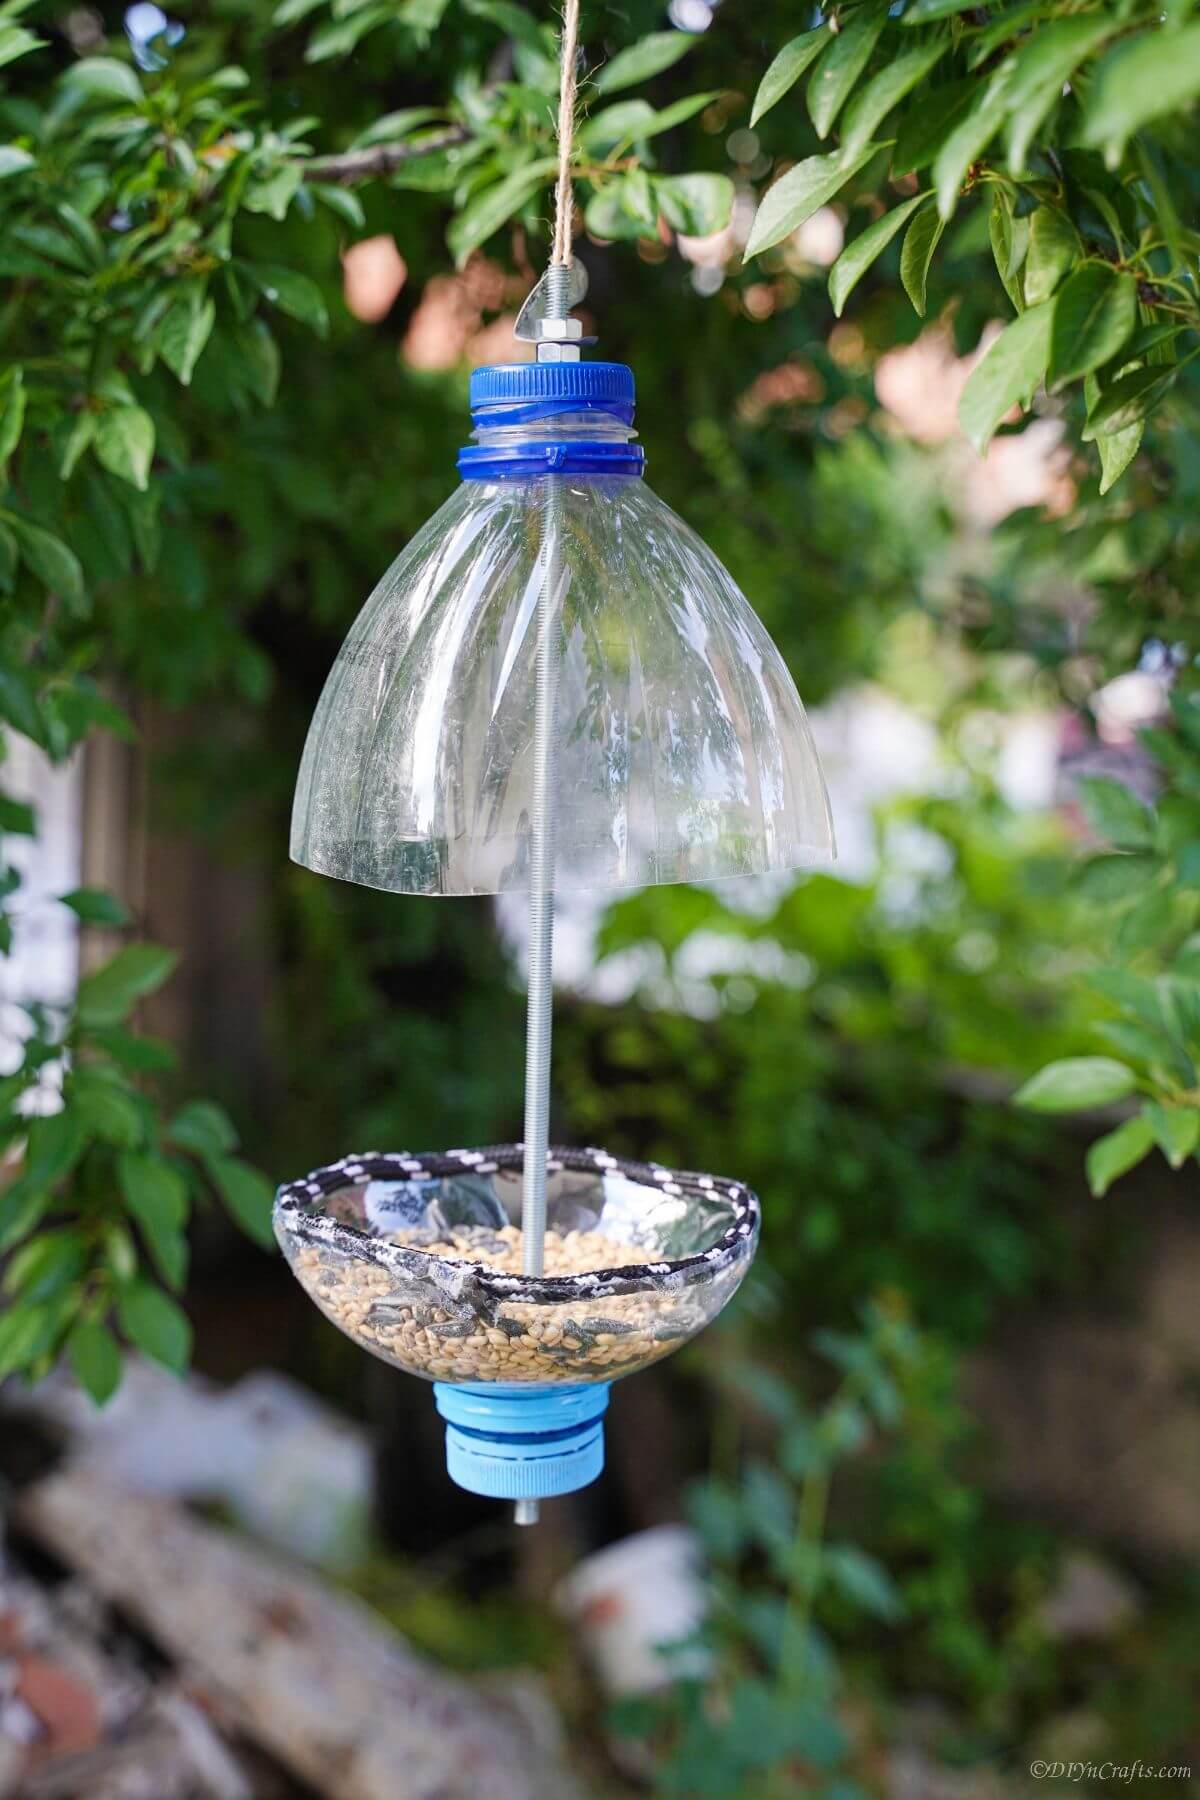 Repurposed Plastic Bottle Bird Feeders Craft Tutorial With Step-by-step Instructions